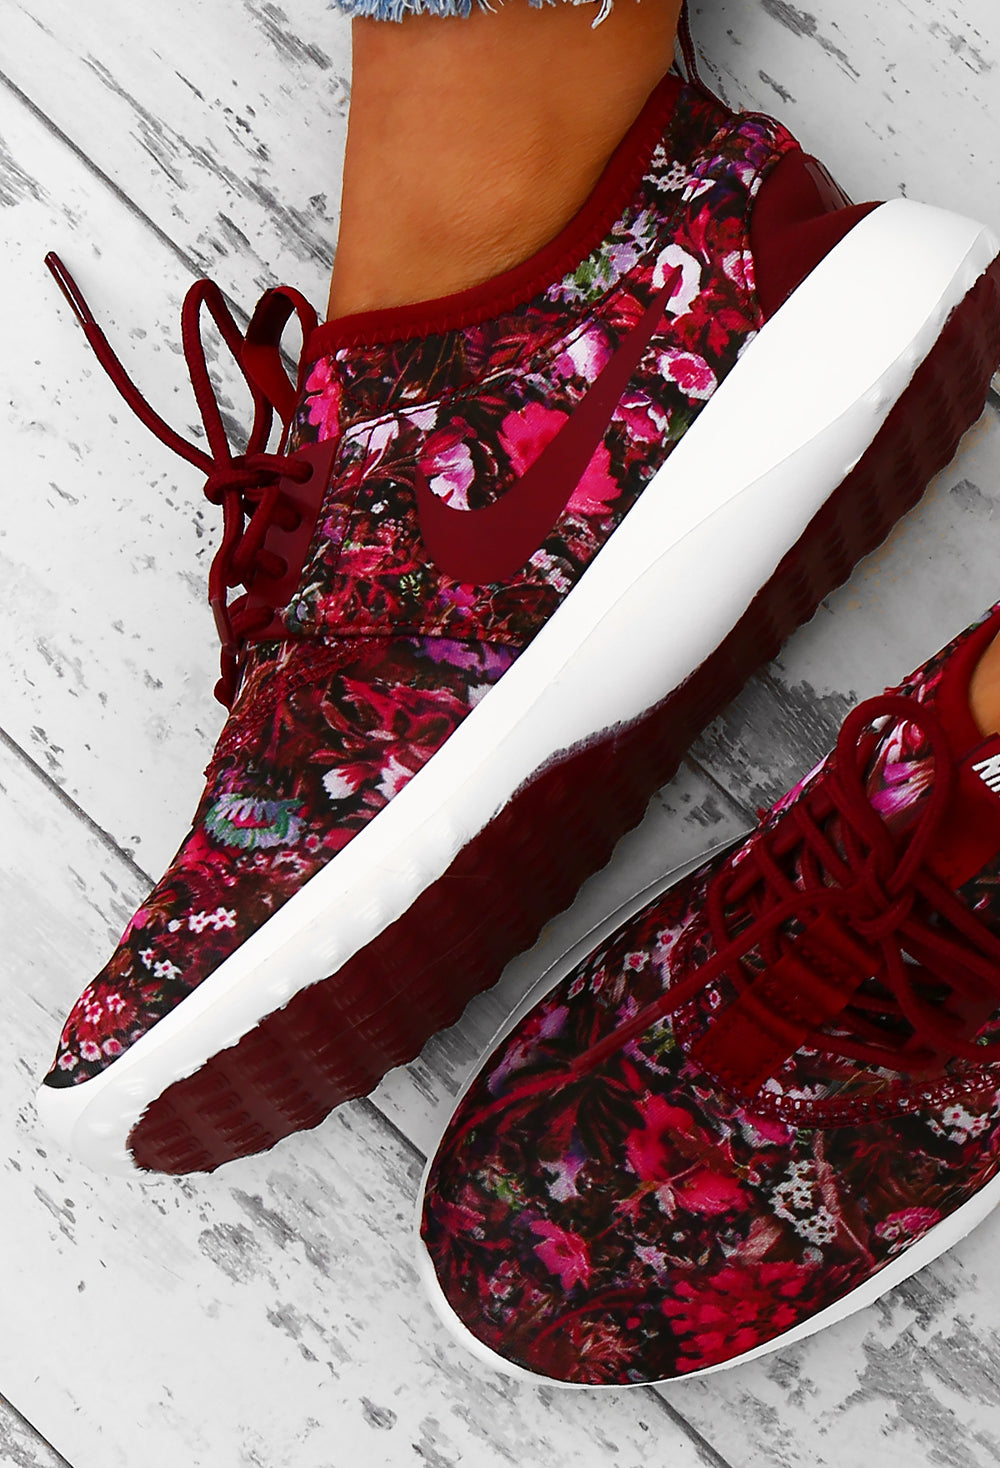 floral trainers nike